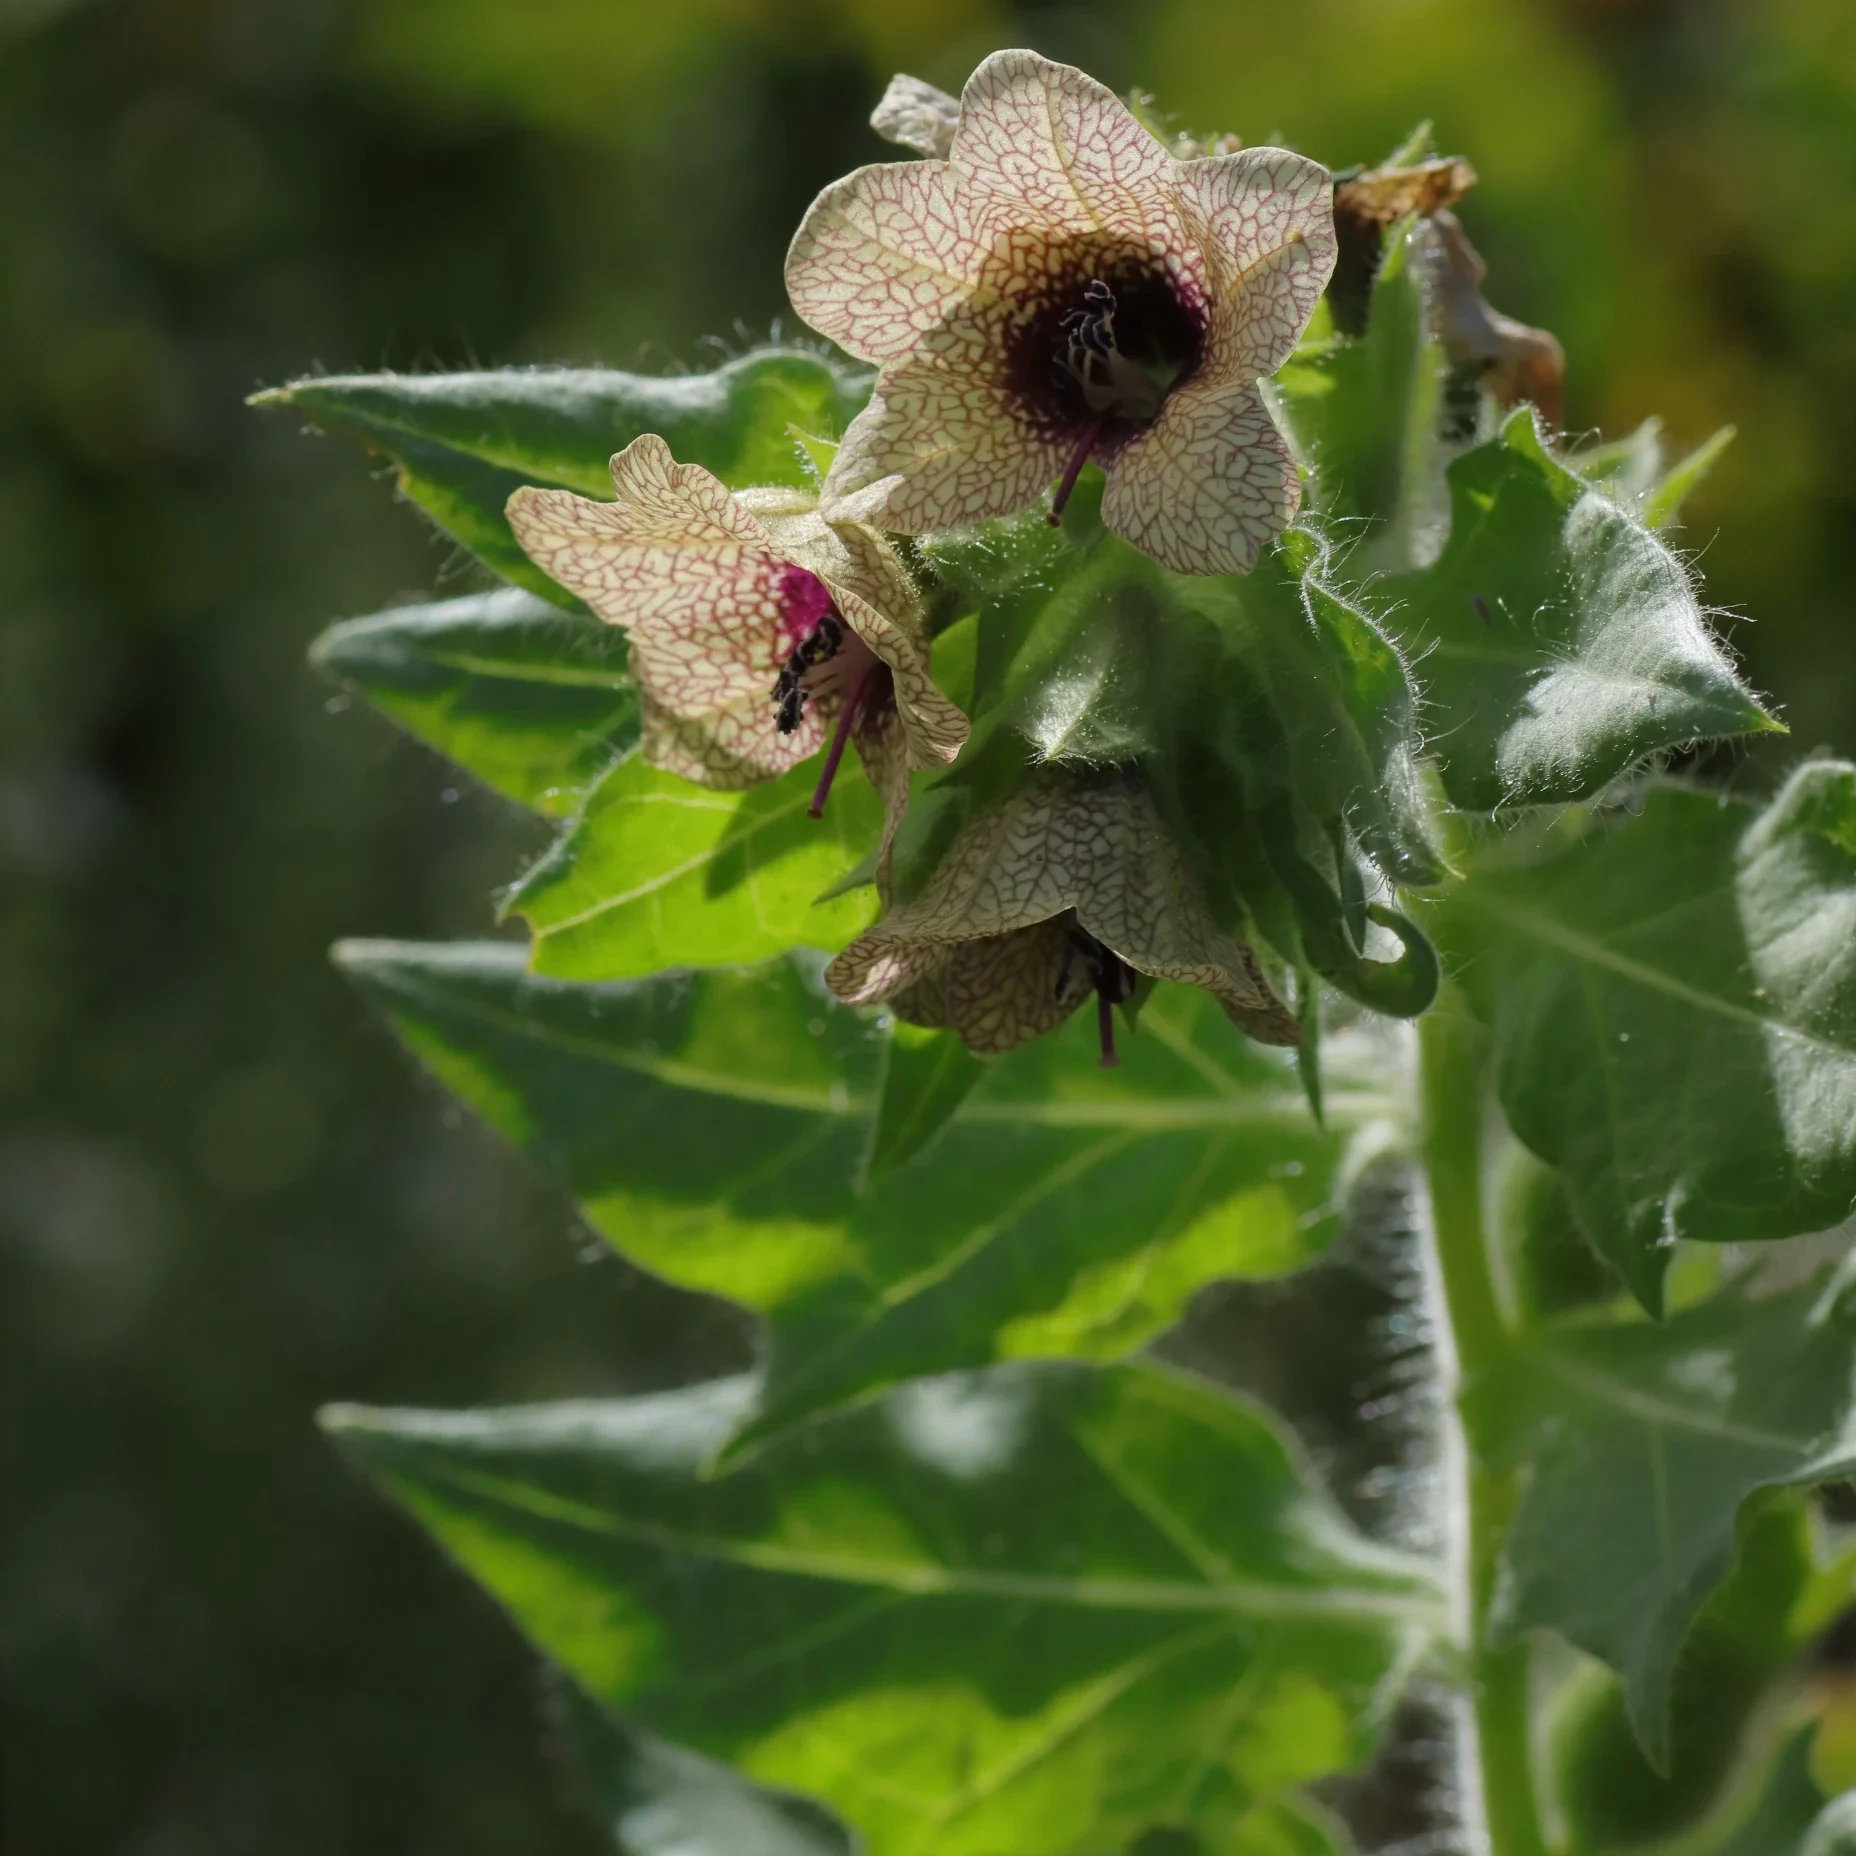 Black henbane - the inflorescences sit between the green-coloured, hairy leaves. The flowers are cream-coloured and have purple veins.